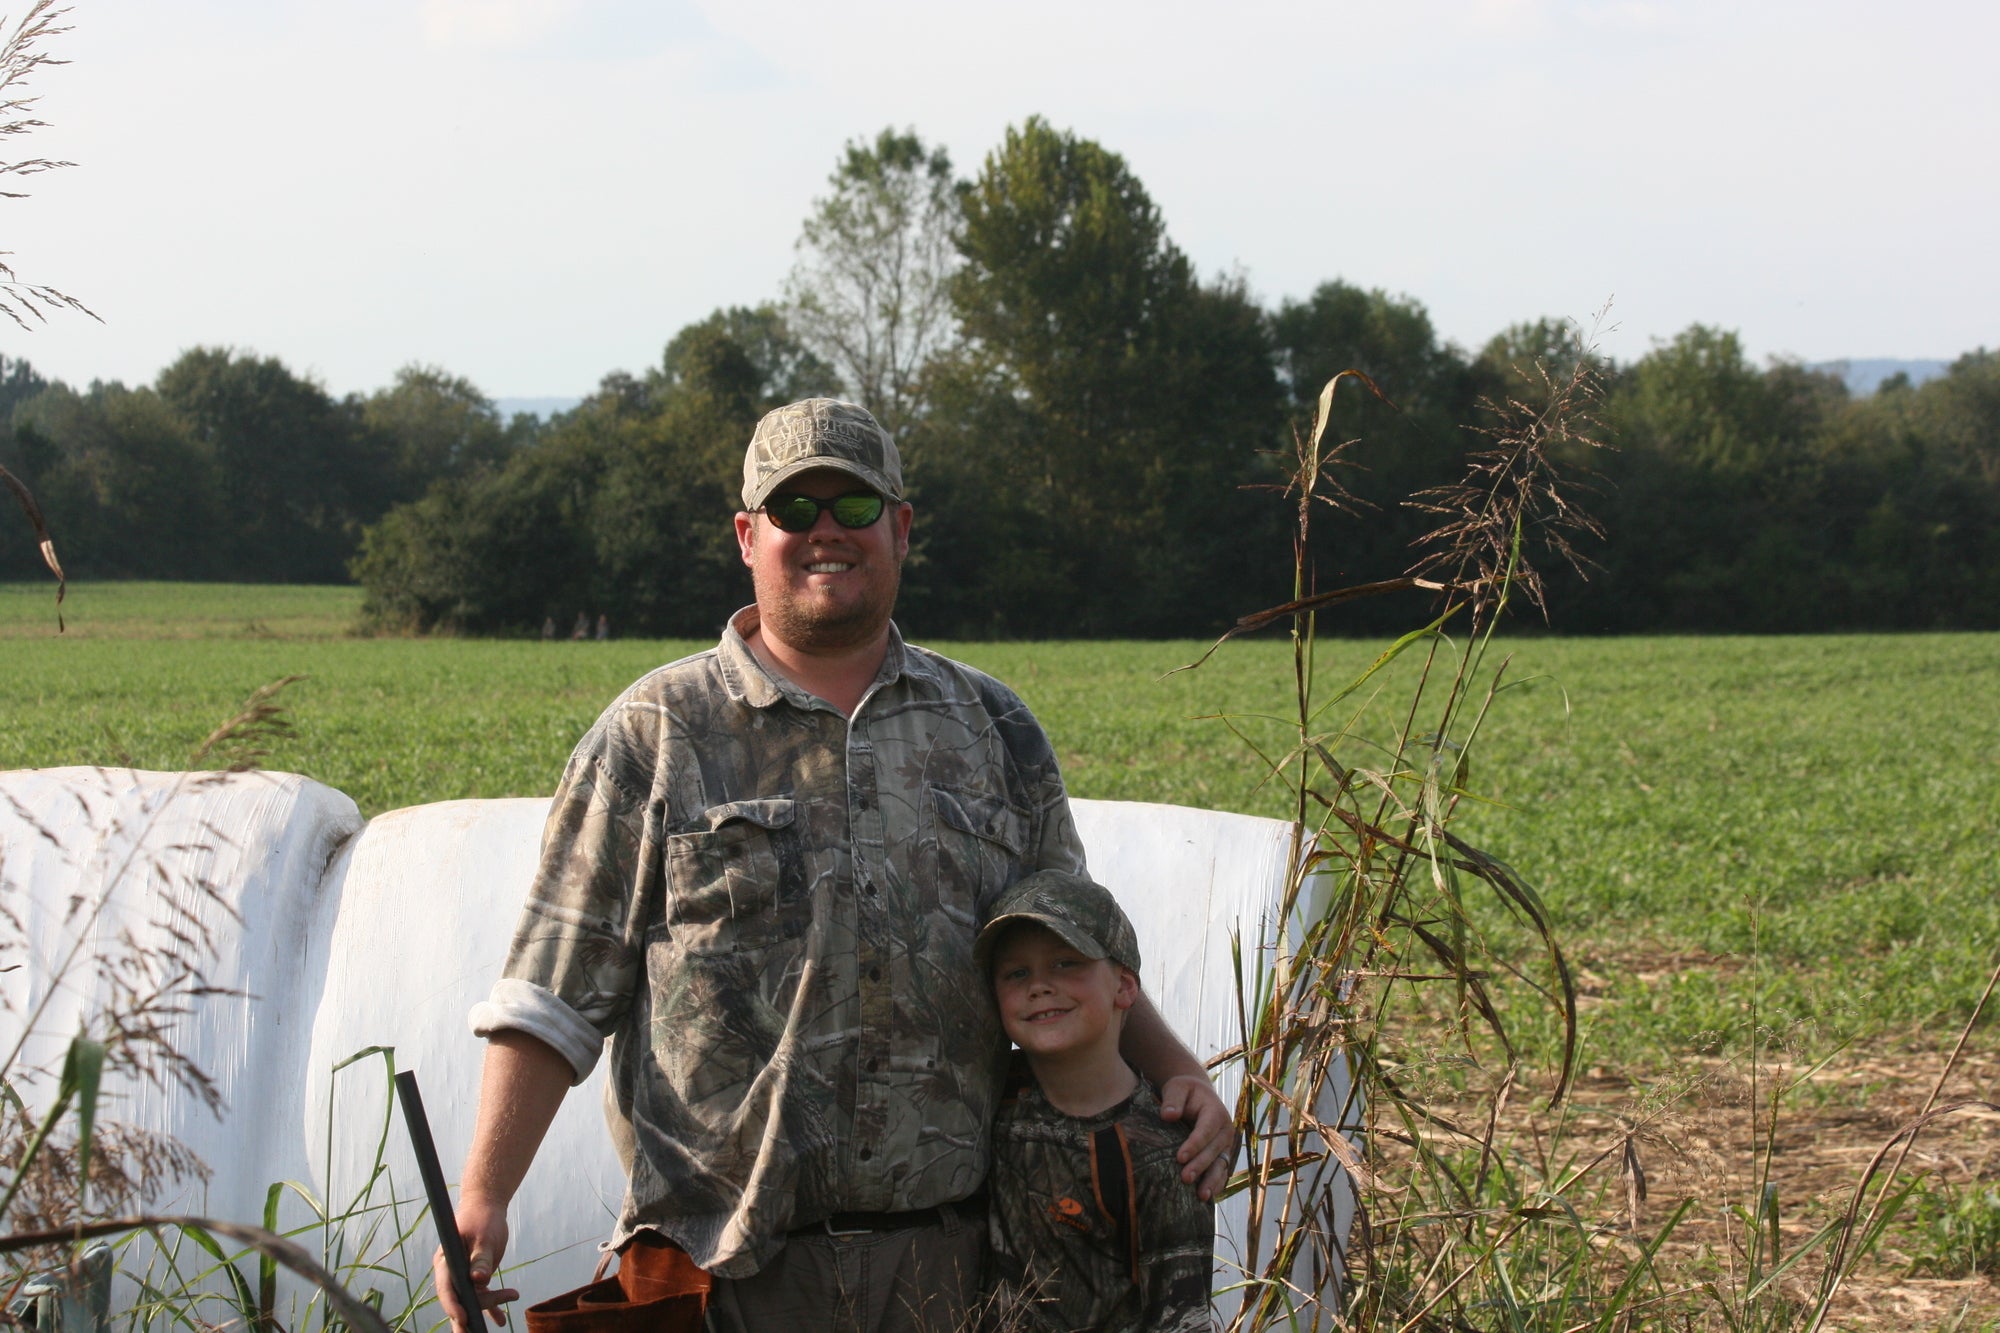 Josh Burnette with his son Logan (age 7) at a Youth Dove Hunt in Jackson County, Alabama.